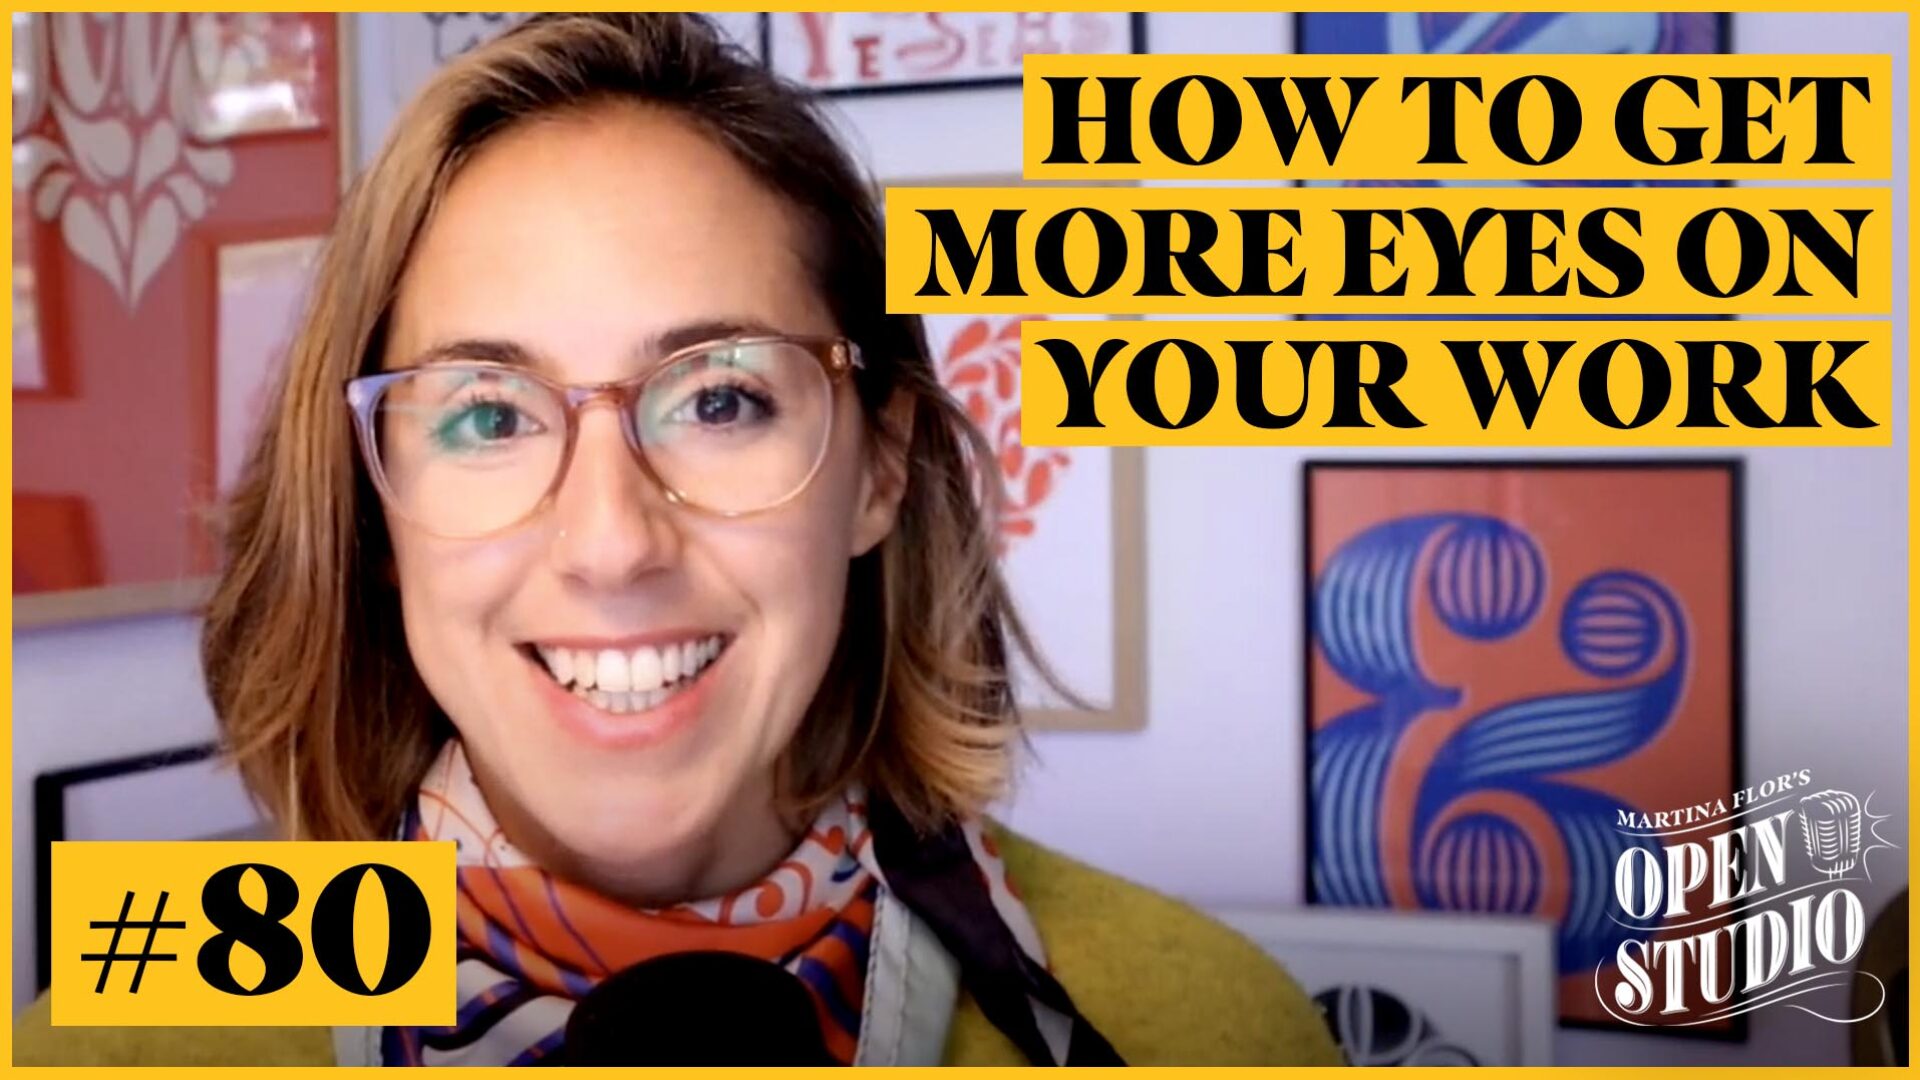 80. Martina Flor – How To Get More Eyes On Your Work